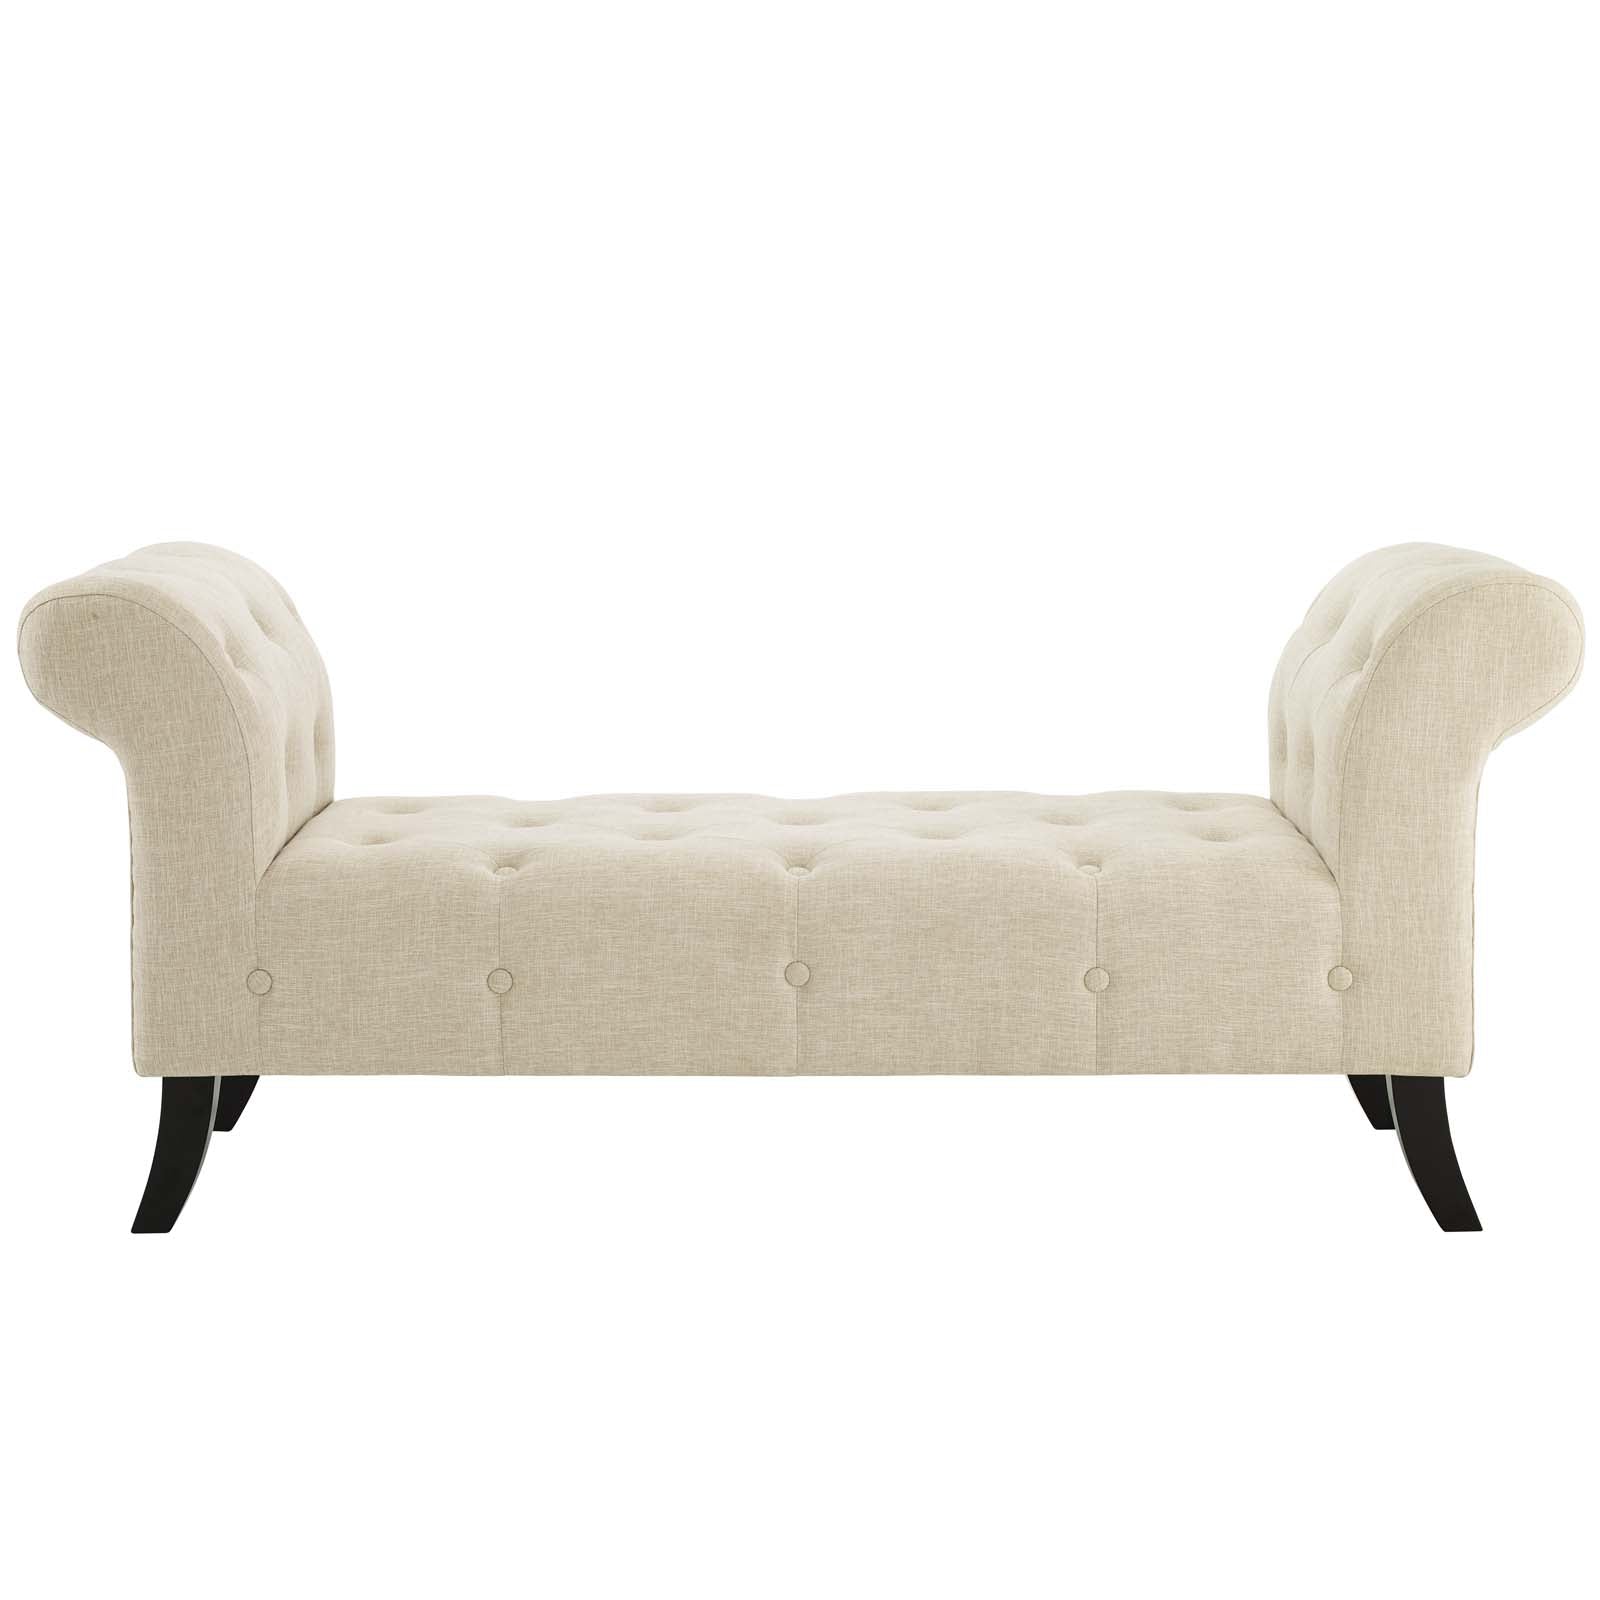 Evince Button Tufted Accent Upholstered Fabric Bench - East Shore Modern Home Furnishings